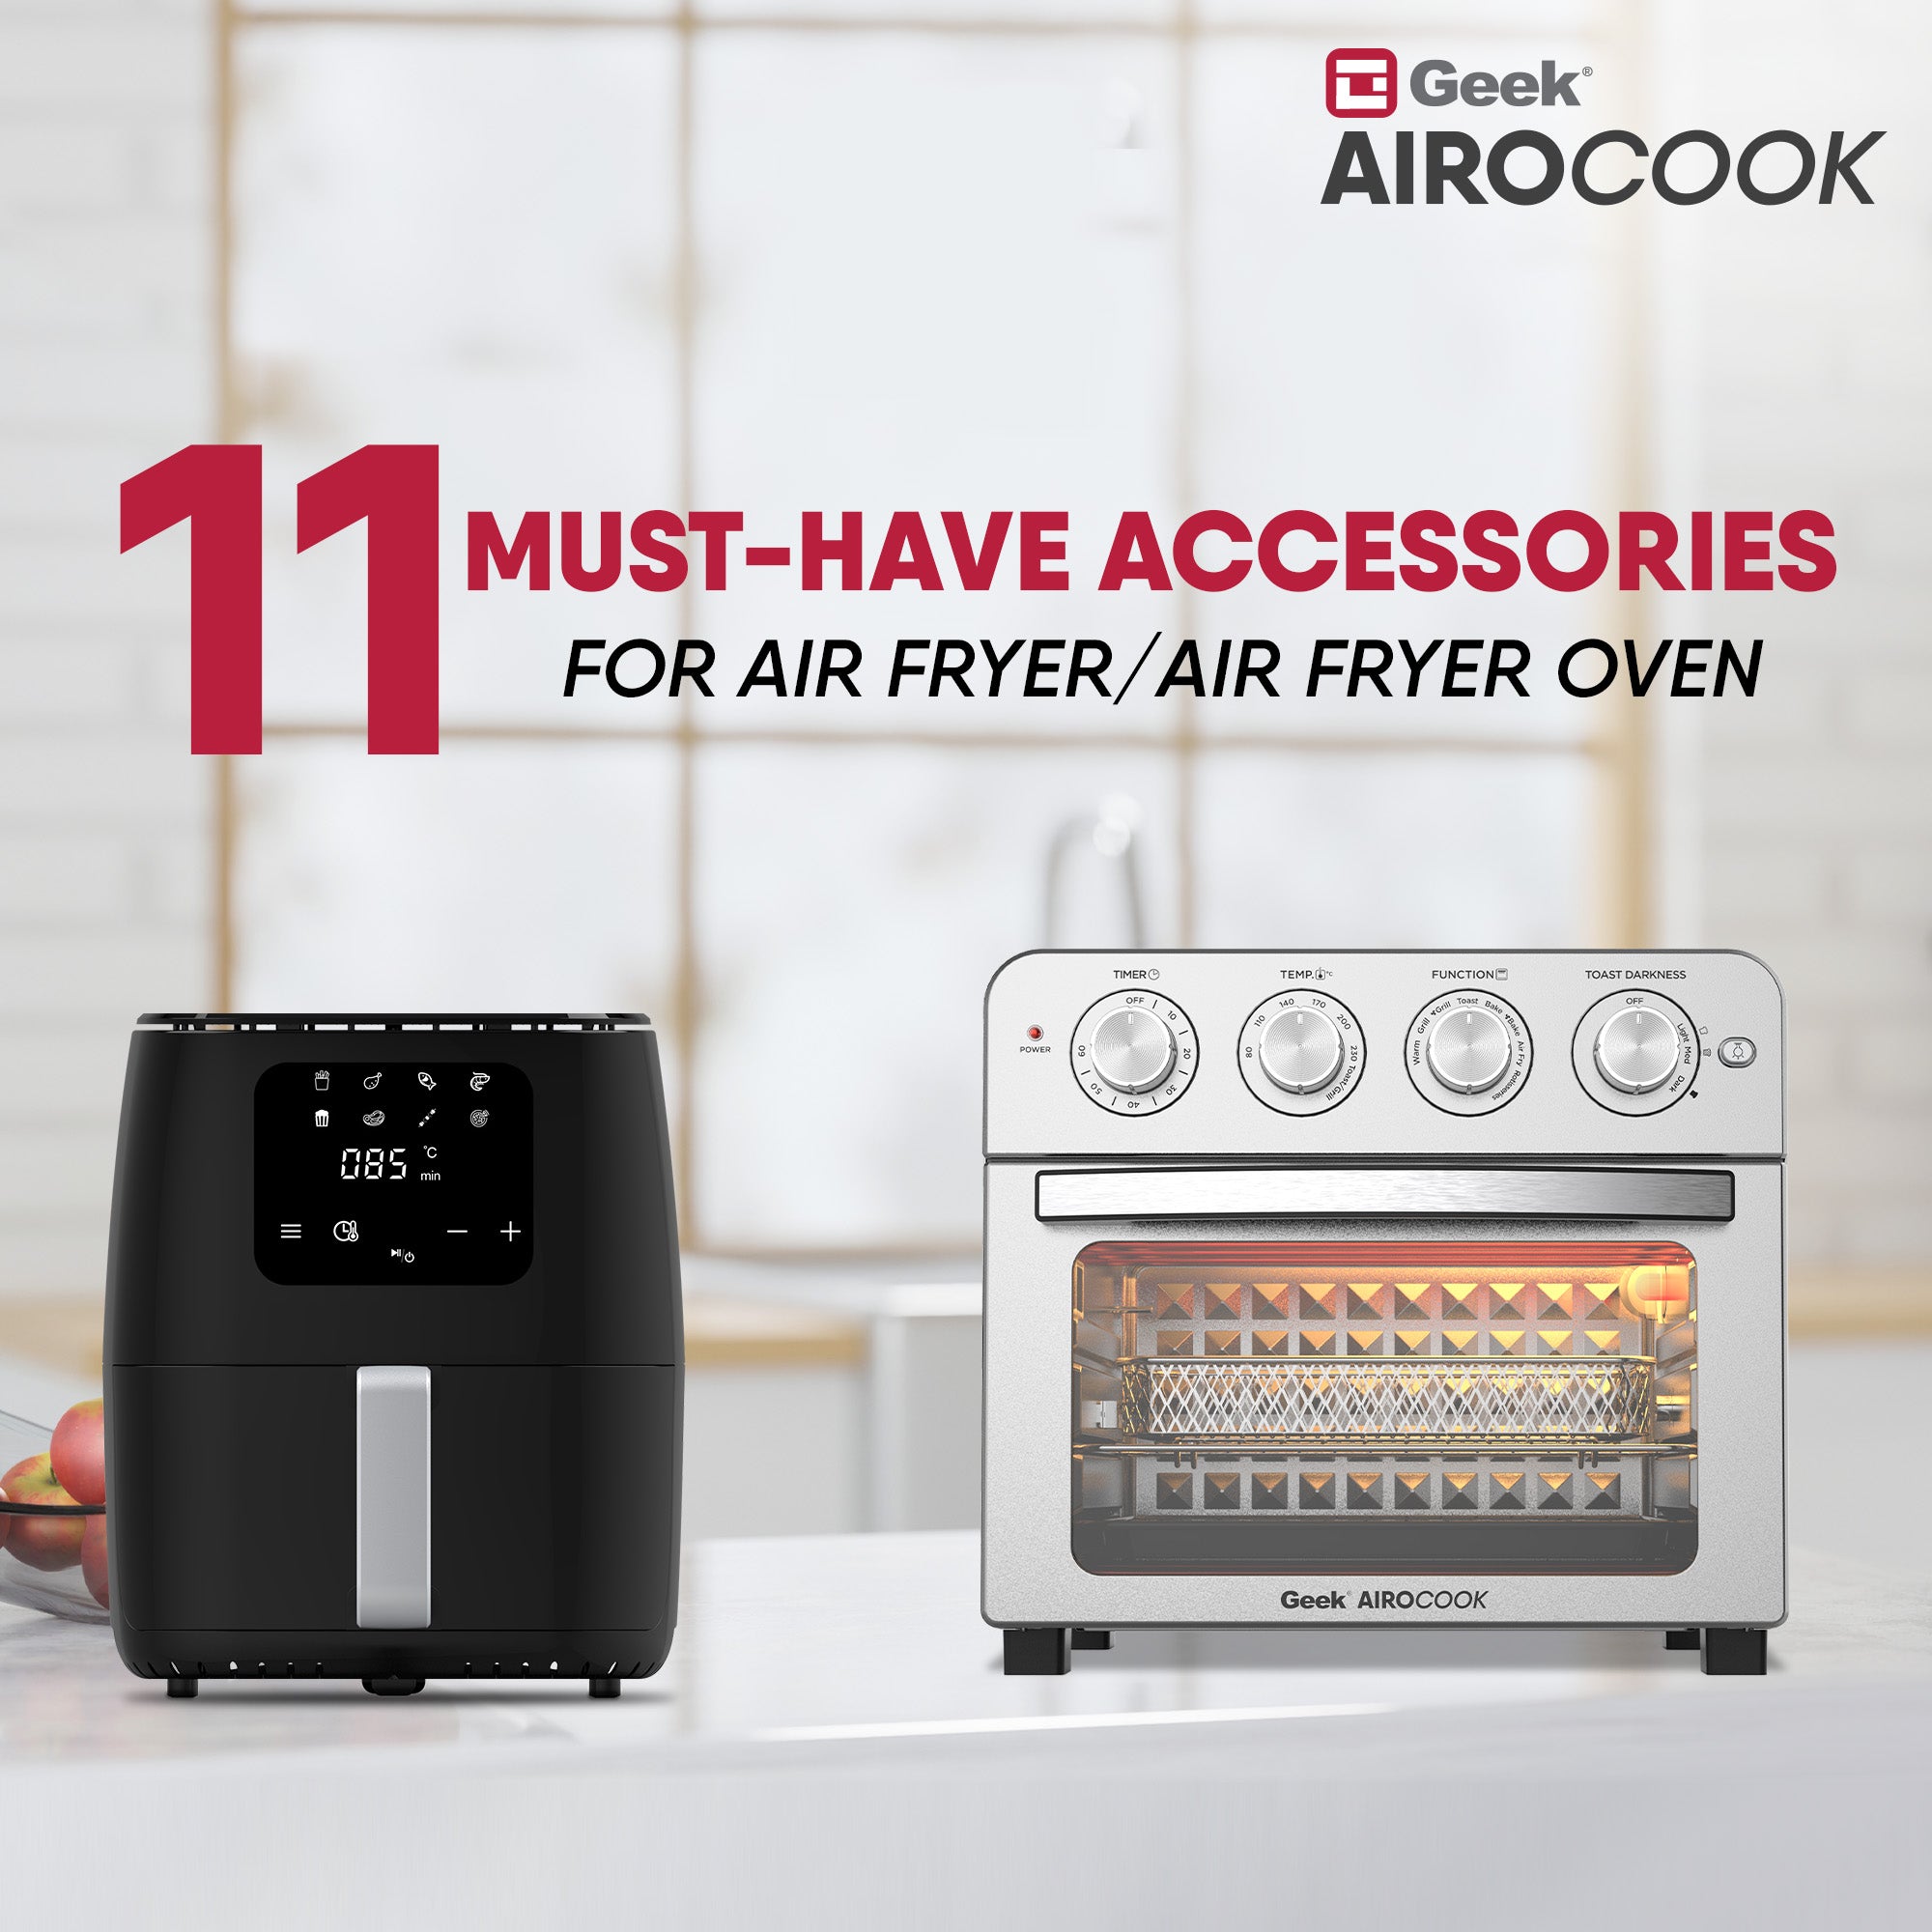 10 Must Accessories For Airfryer and Airfryer Oven